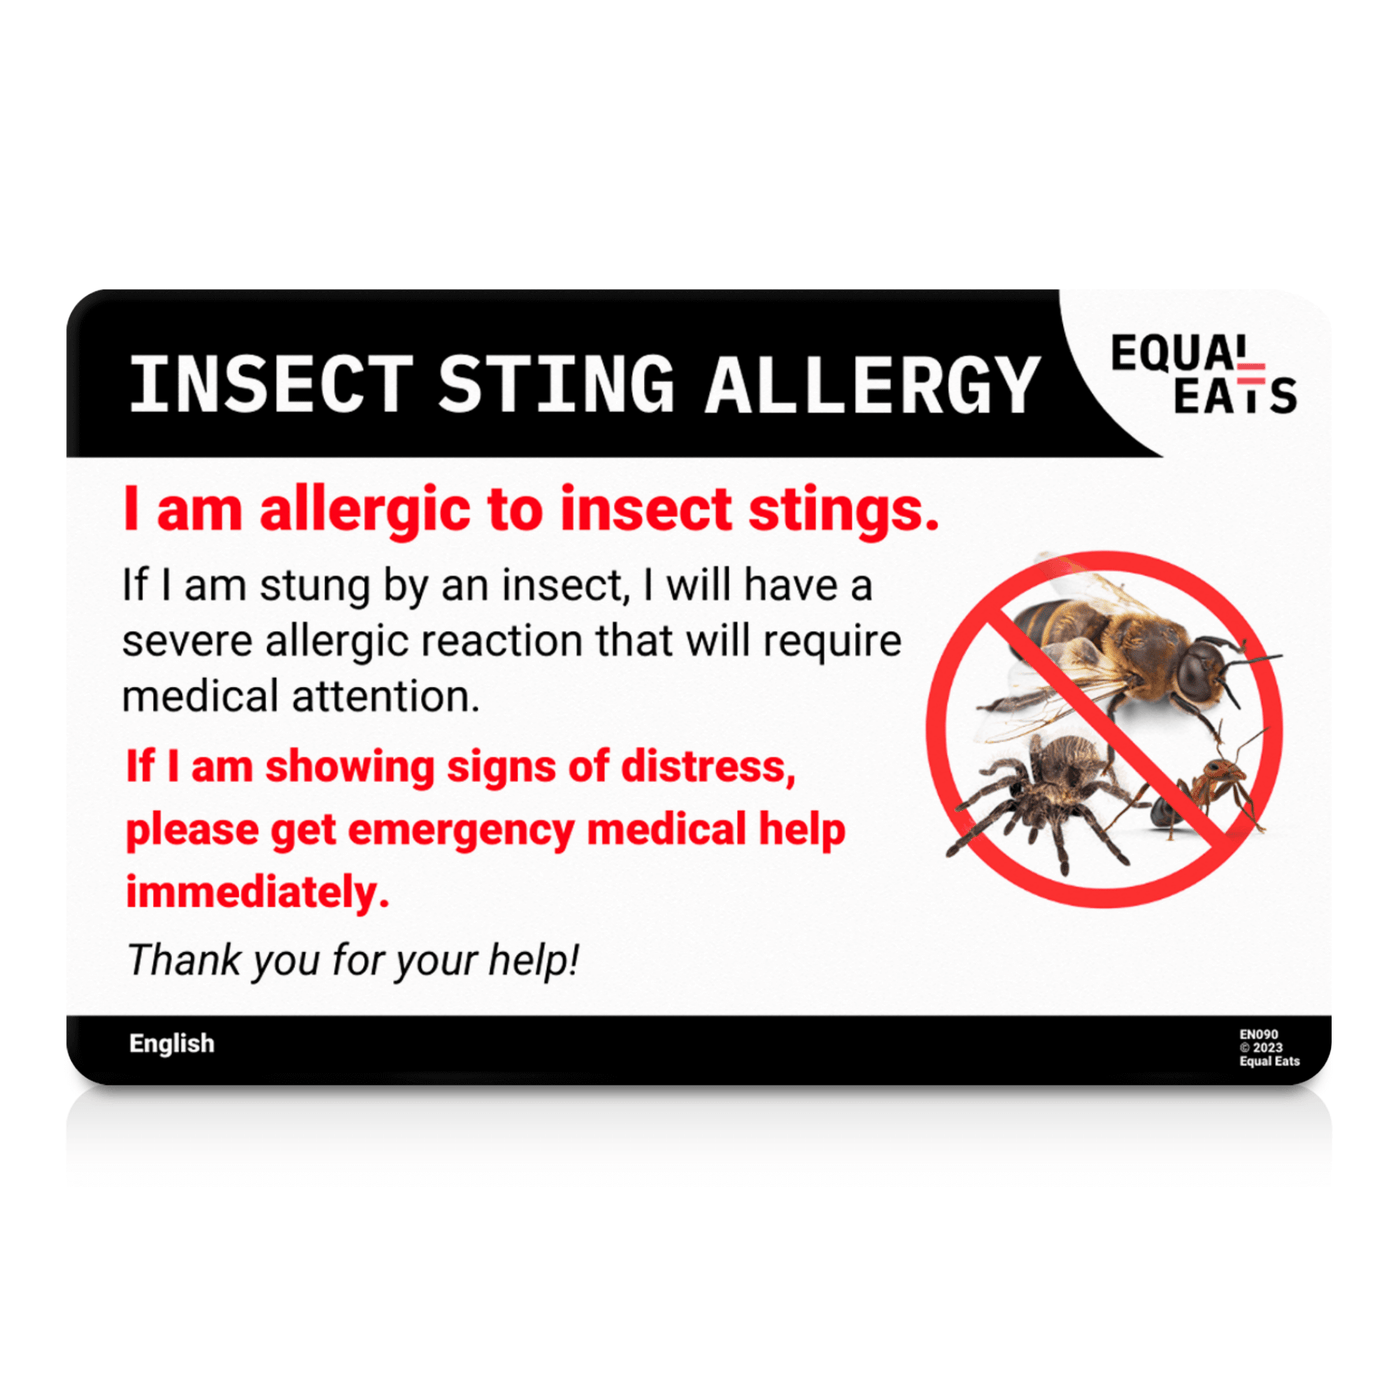 Slovak Insect Sting Allergy Card